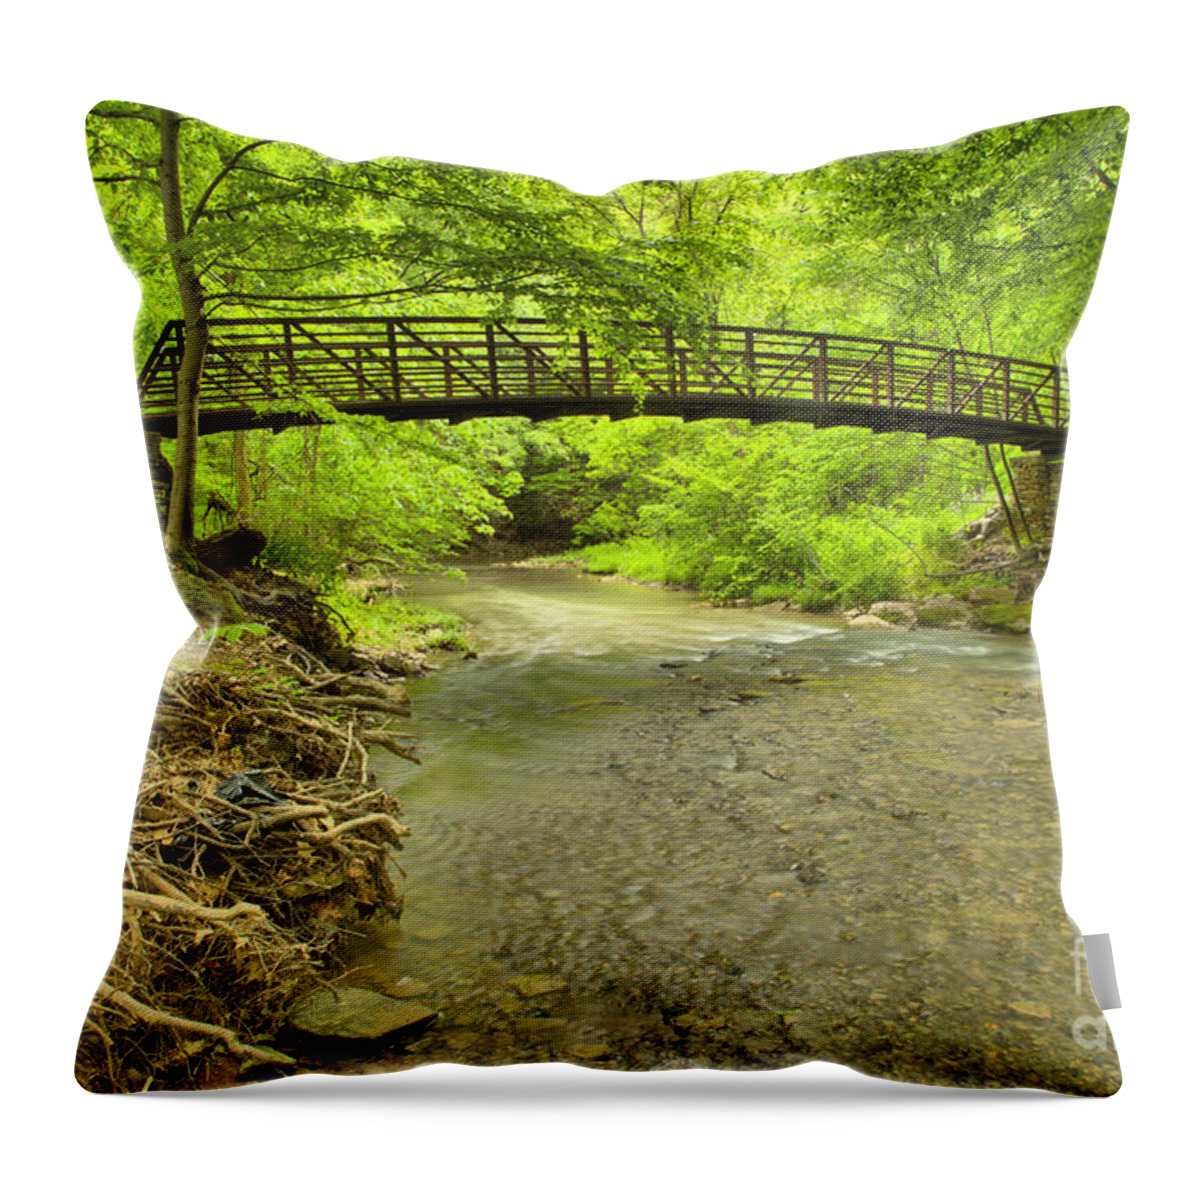 Murrysville Throw Pillow featuring the photograph Erosion By The Duff Park Bridge by Adam Jewell